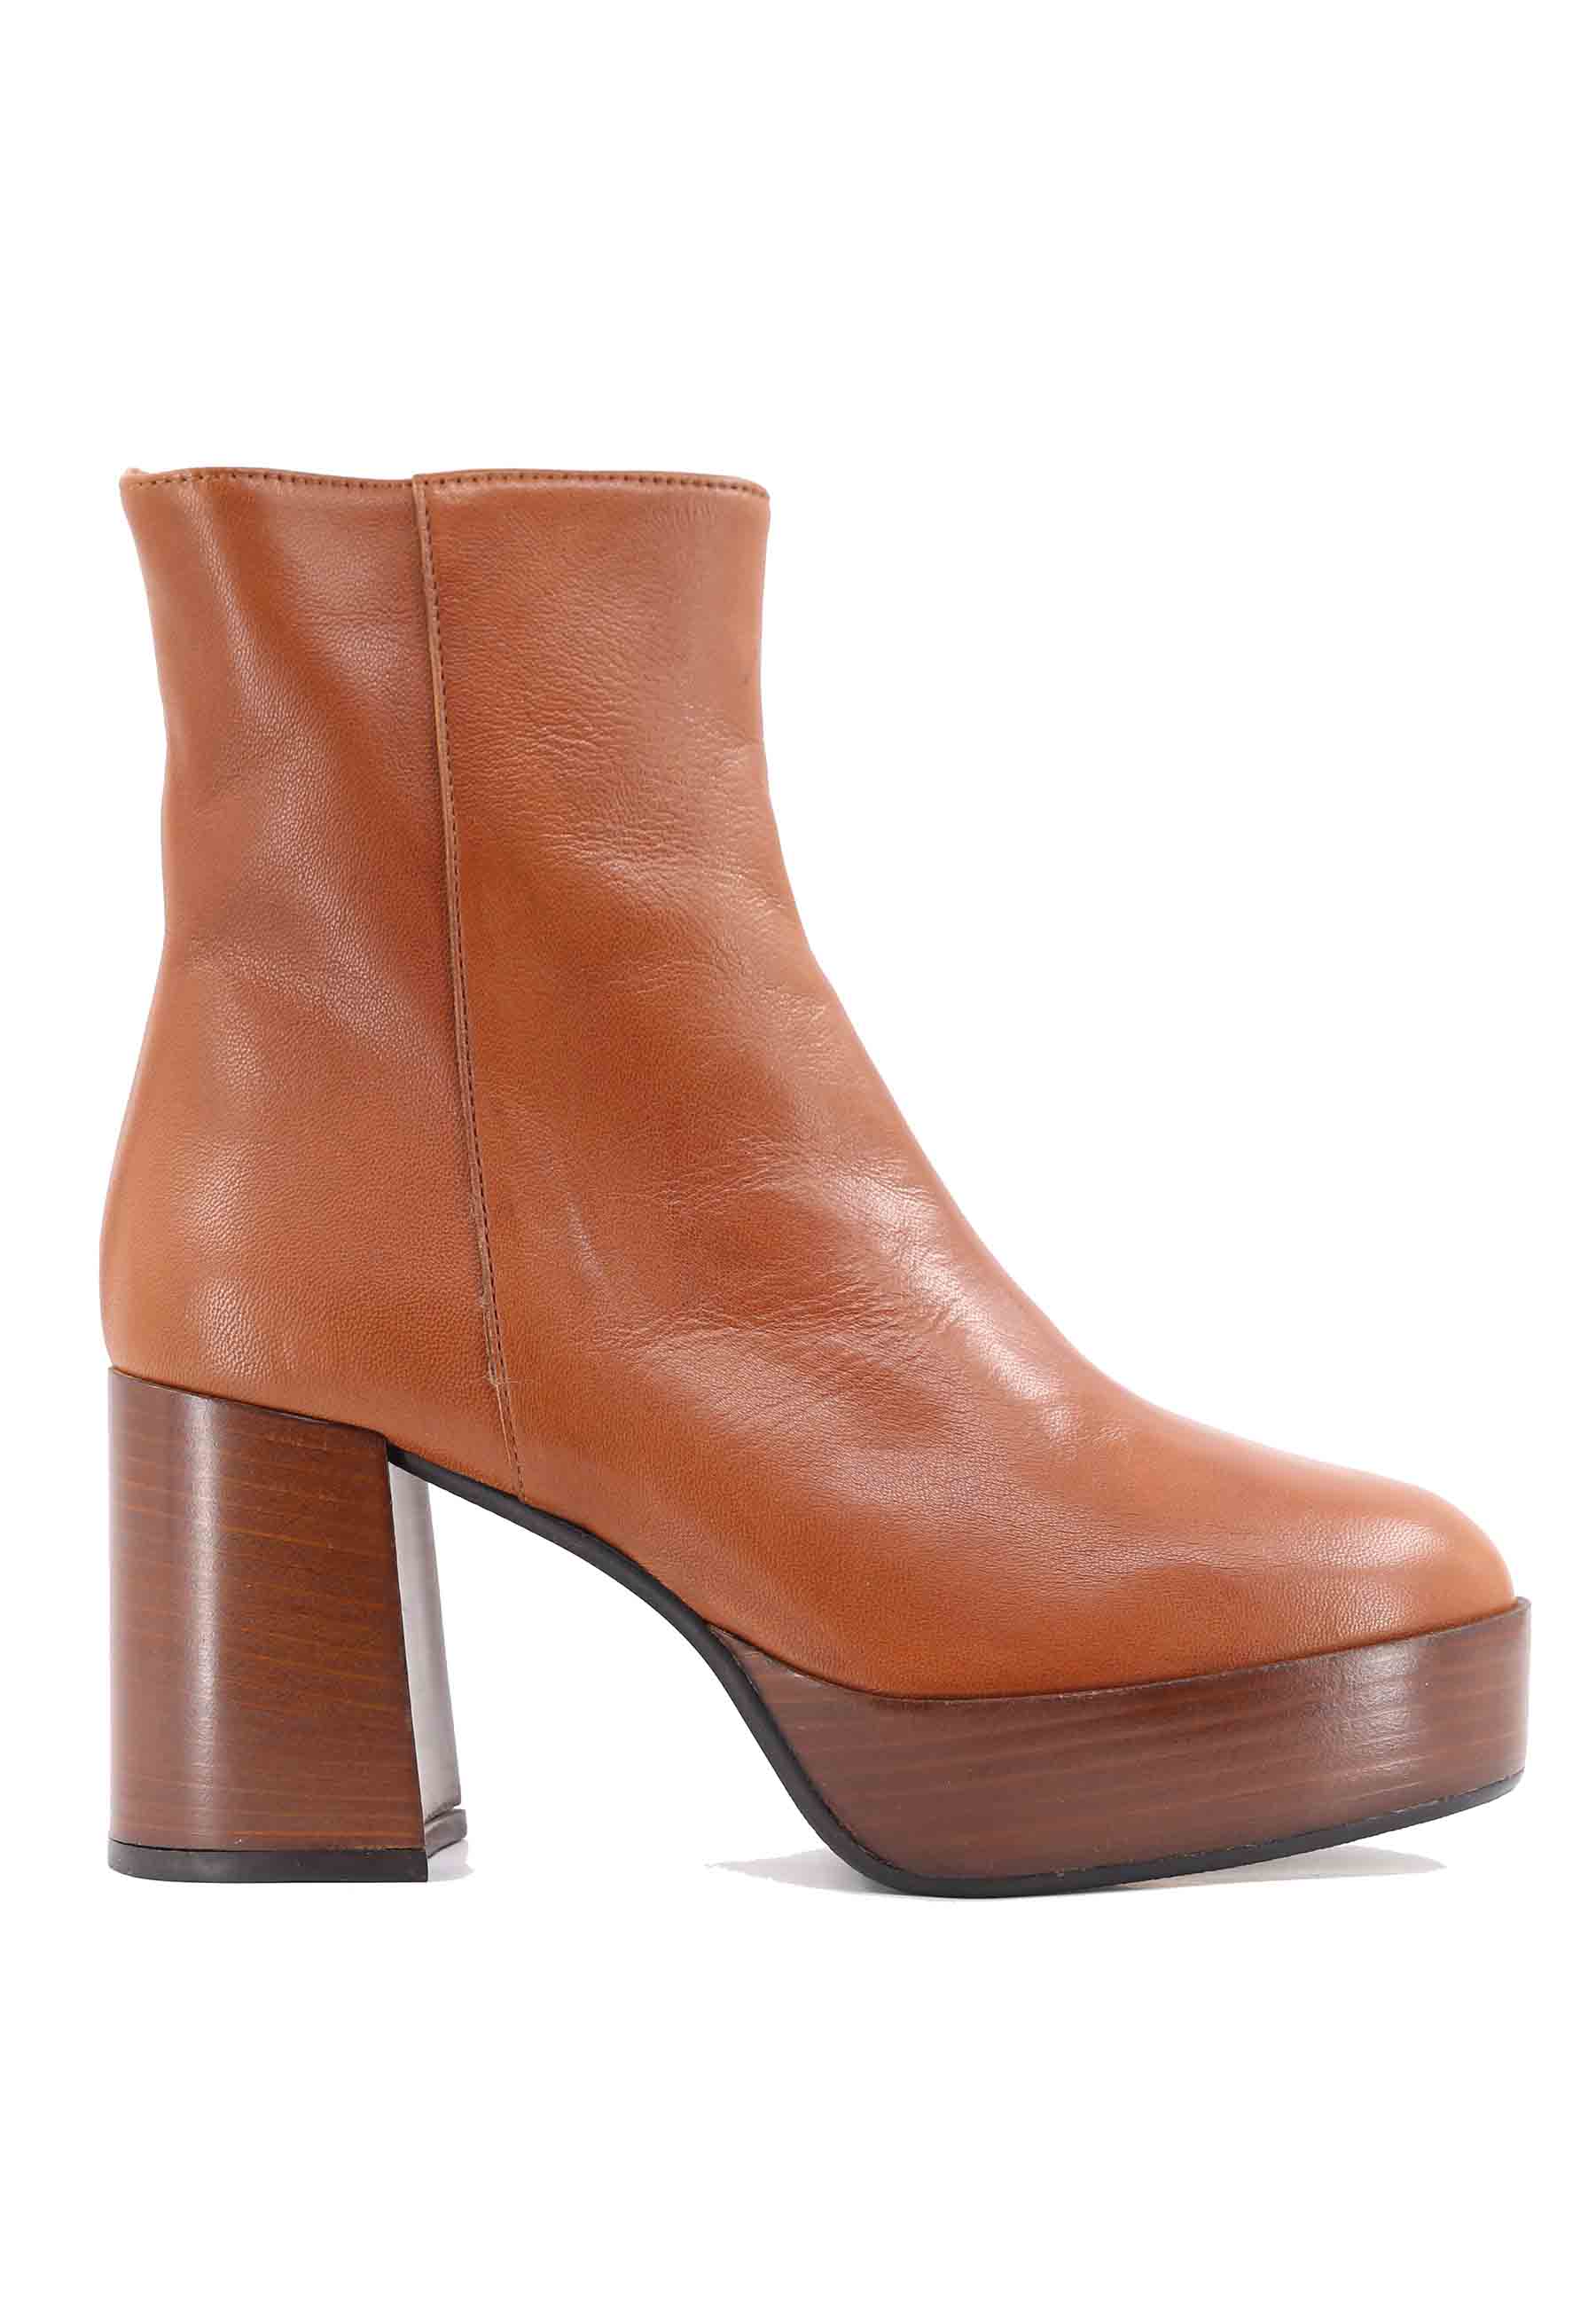 TR1556 ankle boots in tan leather with high heel and platform with side zip closure